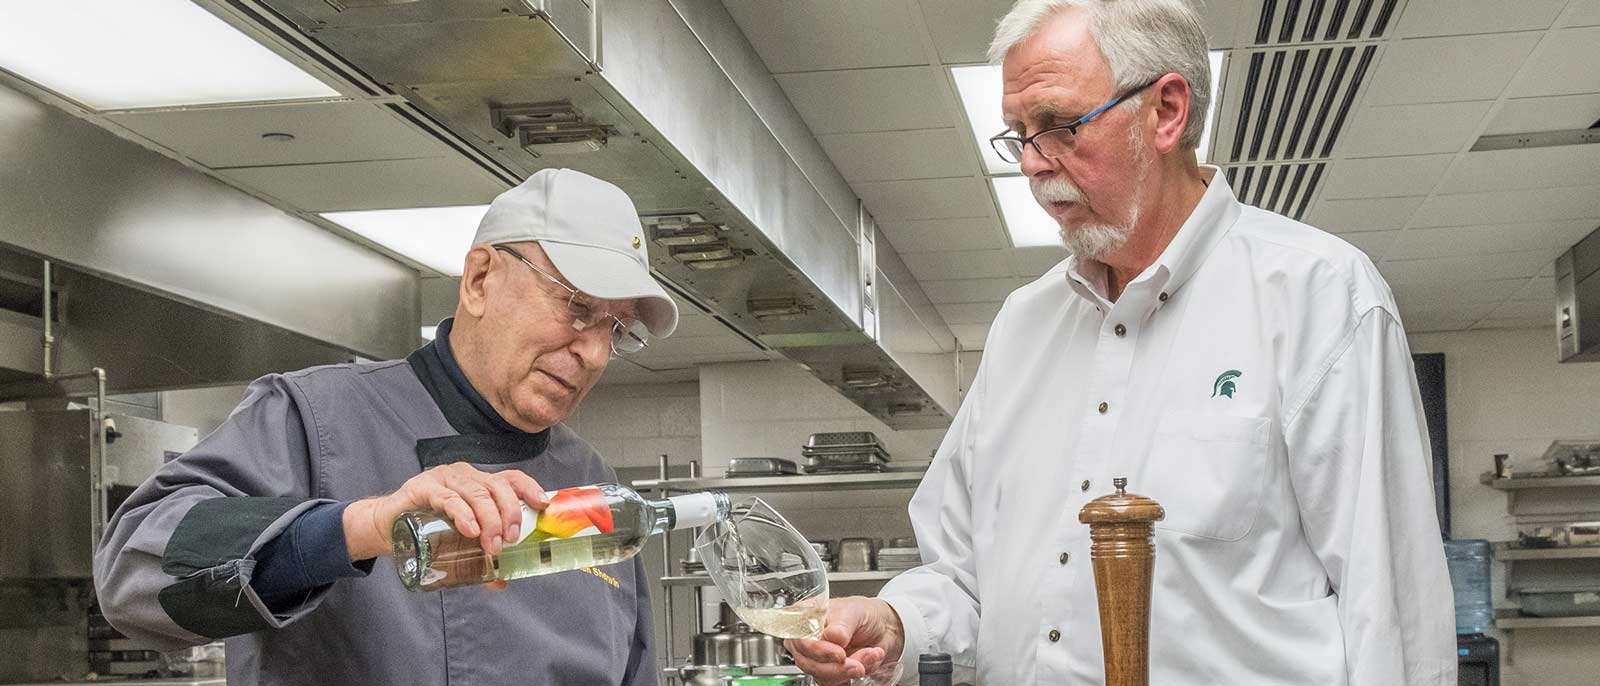 Michigan State University professor Allan Sherwin pours a glass of wine for former The School of Hospitality Business Director Carl Borchgrevink, standing inside a commercial kitchen.